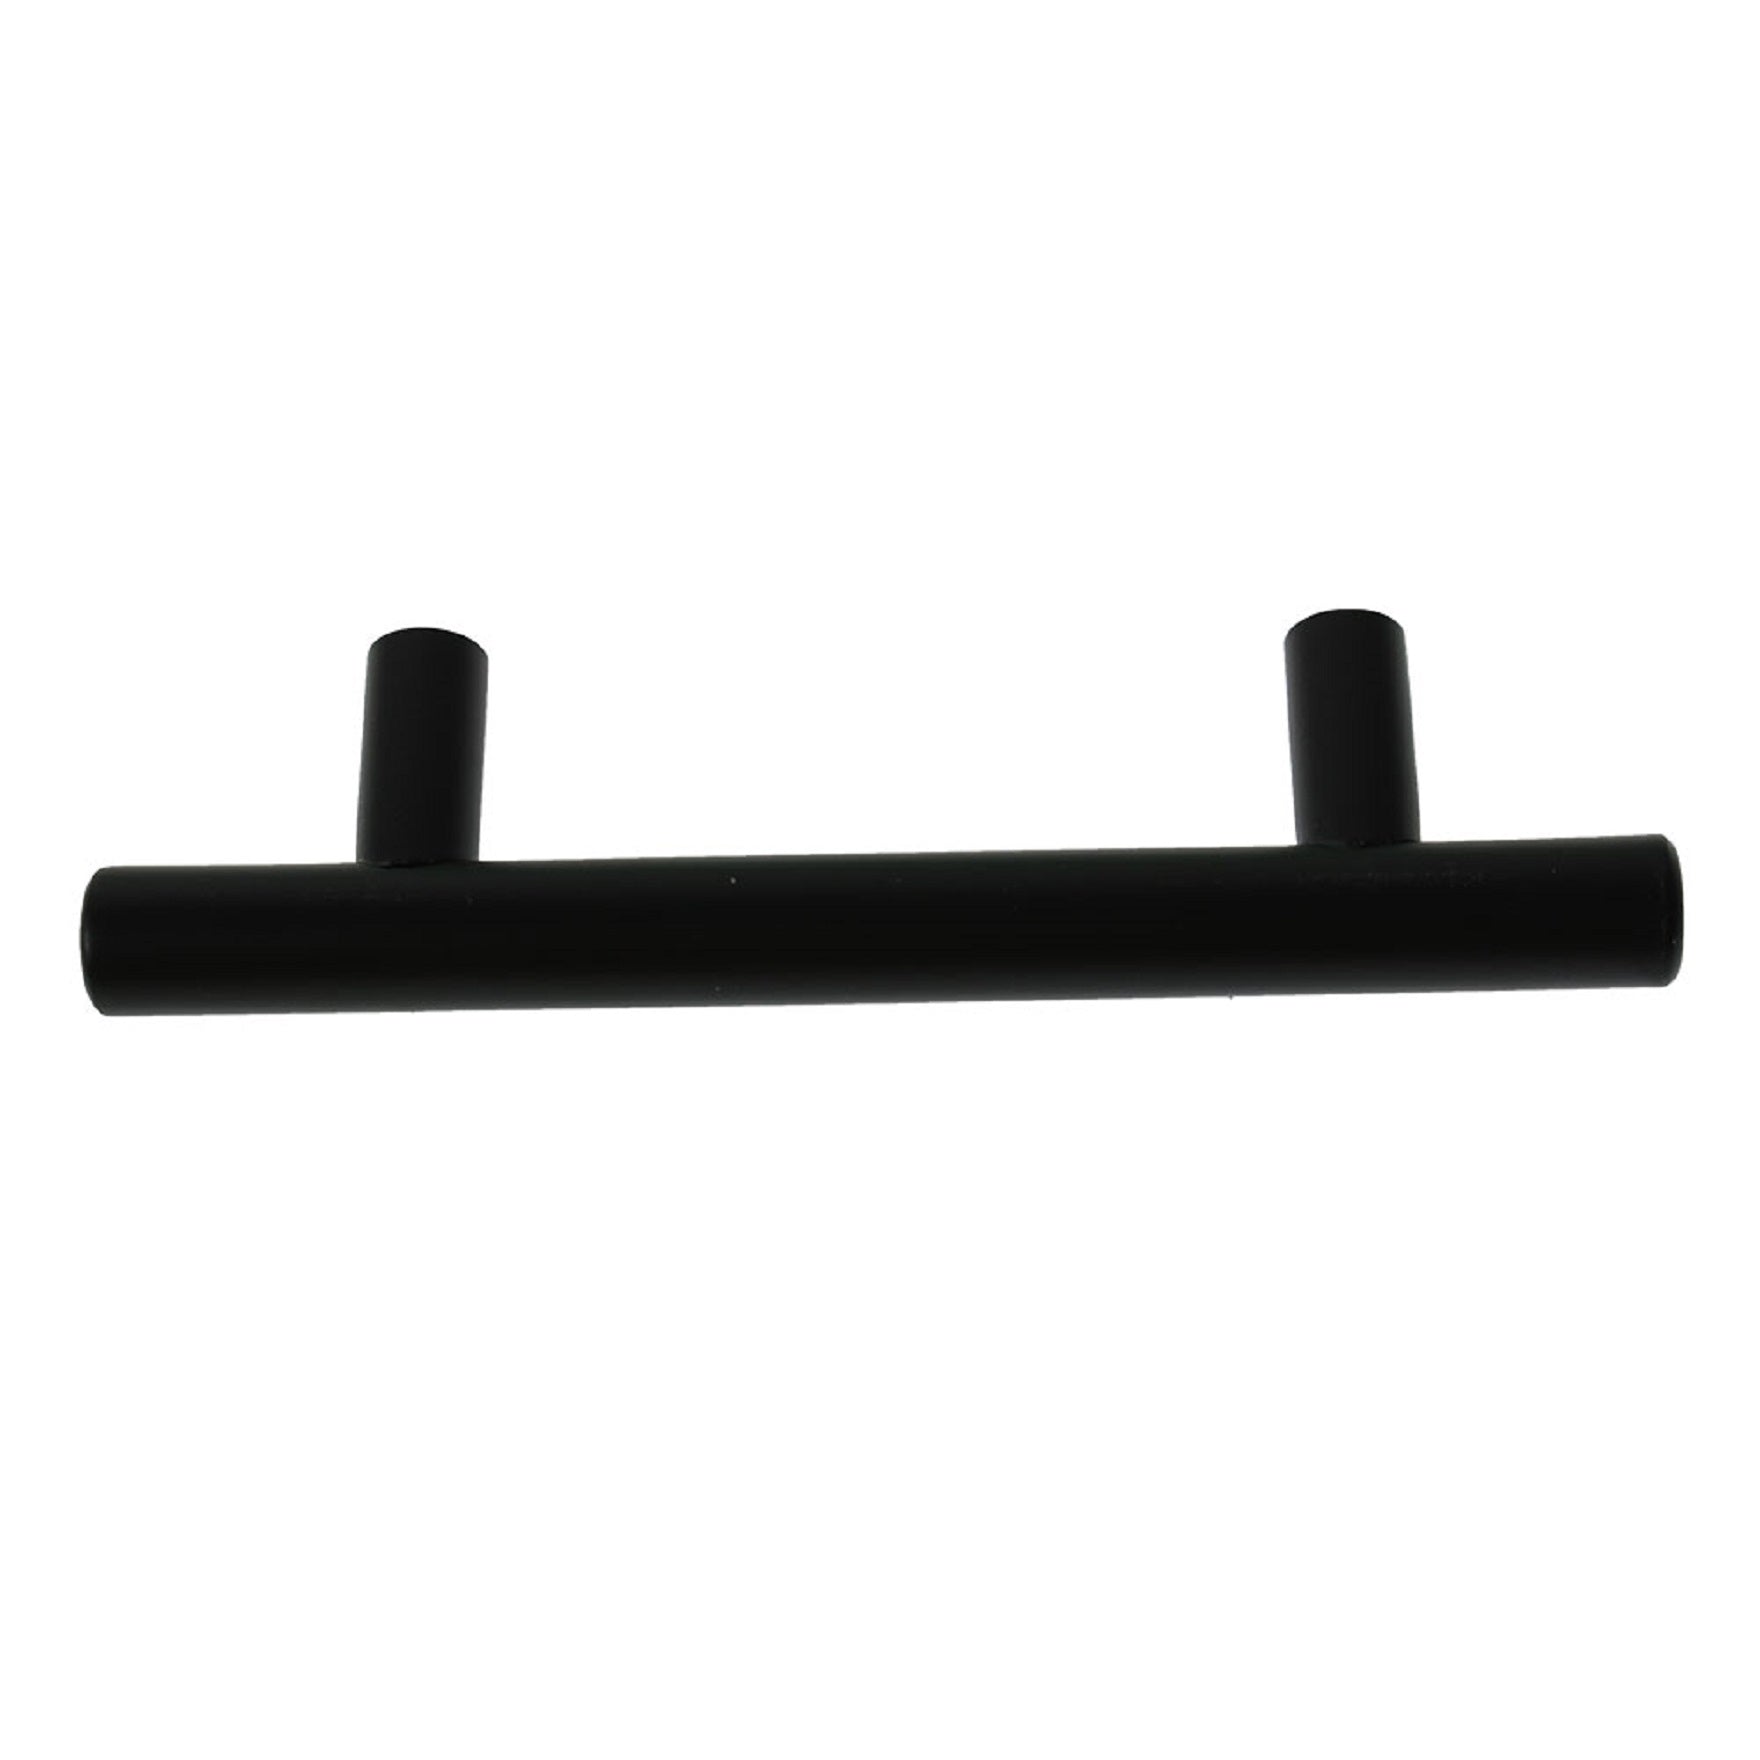 findmall  30 Pack 5 Inch Cabinet Handle Black Stainless Steel Drawer Pulls Cabinet Pulls Bar Kitchen Handles 3 Inch Hole Center FINDMALLPARTS